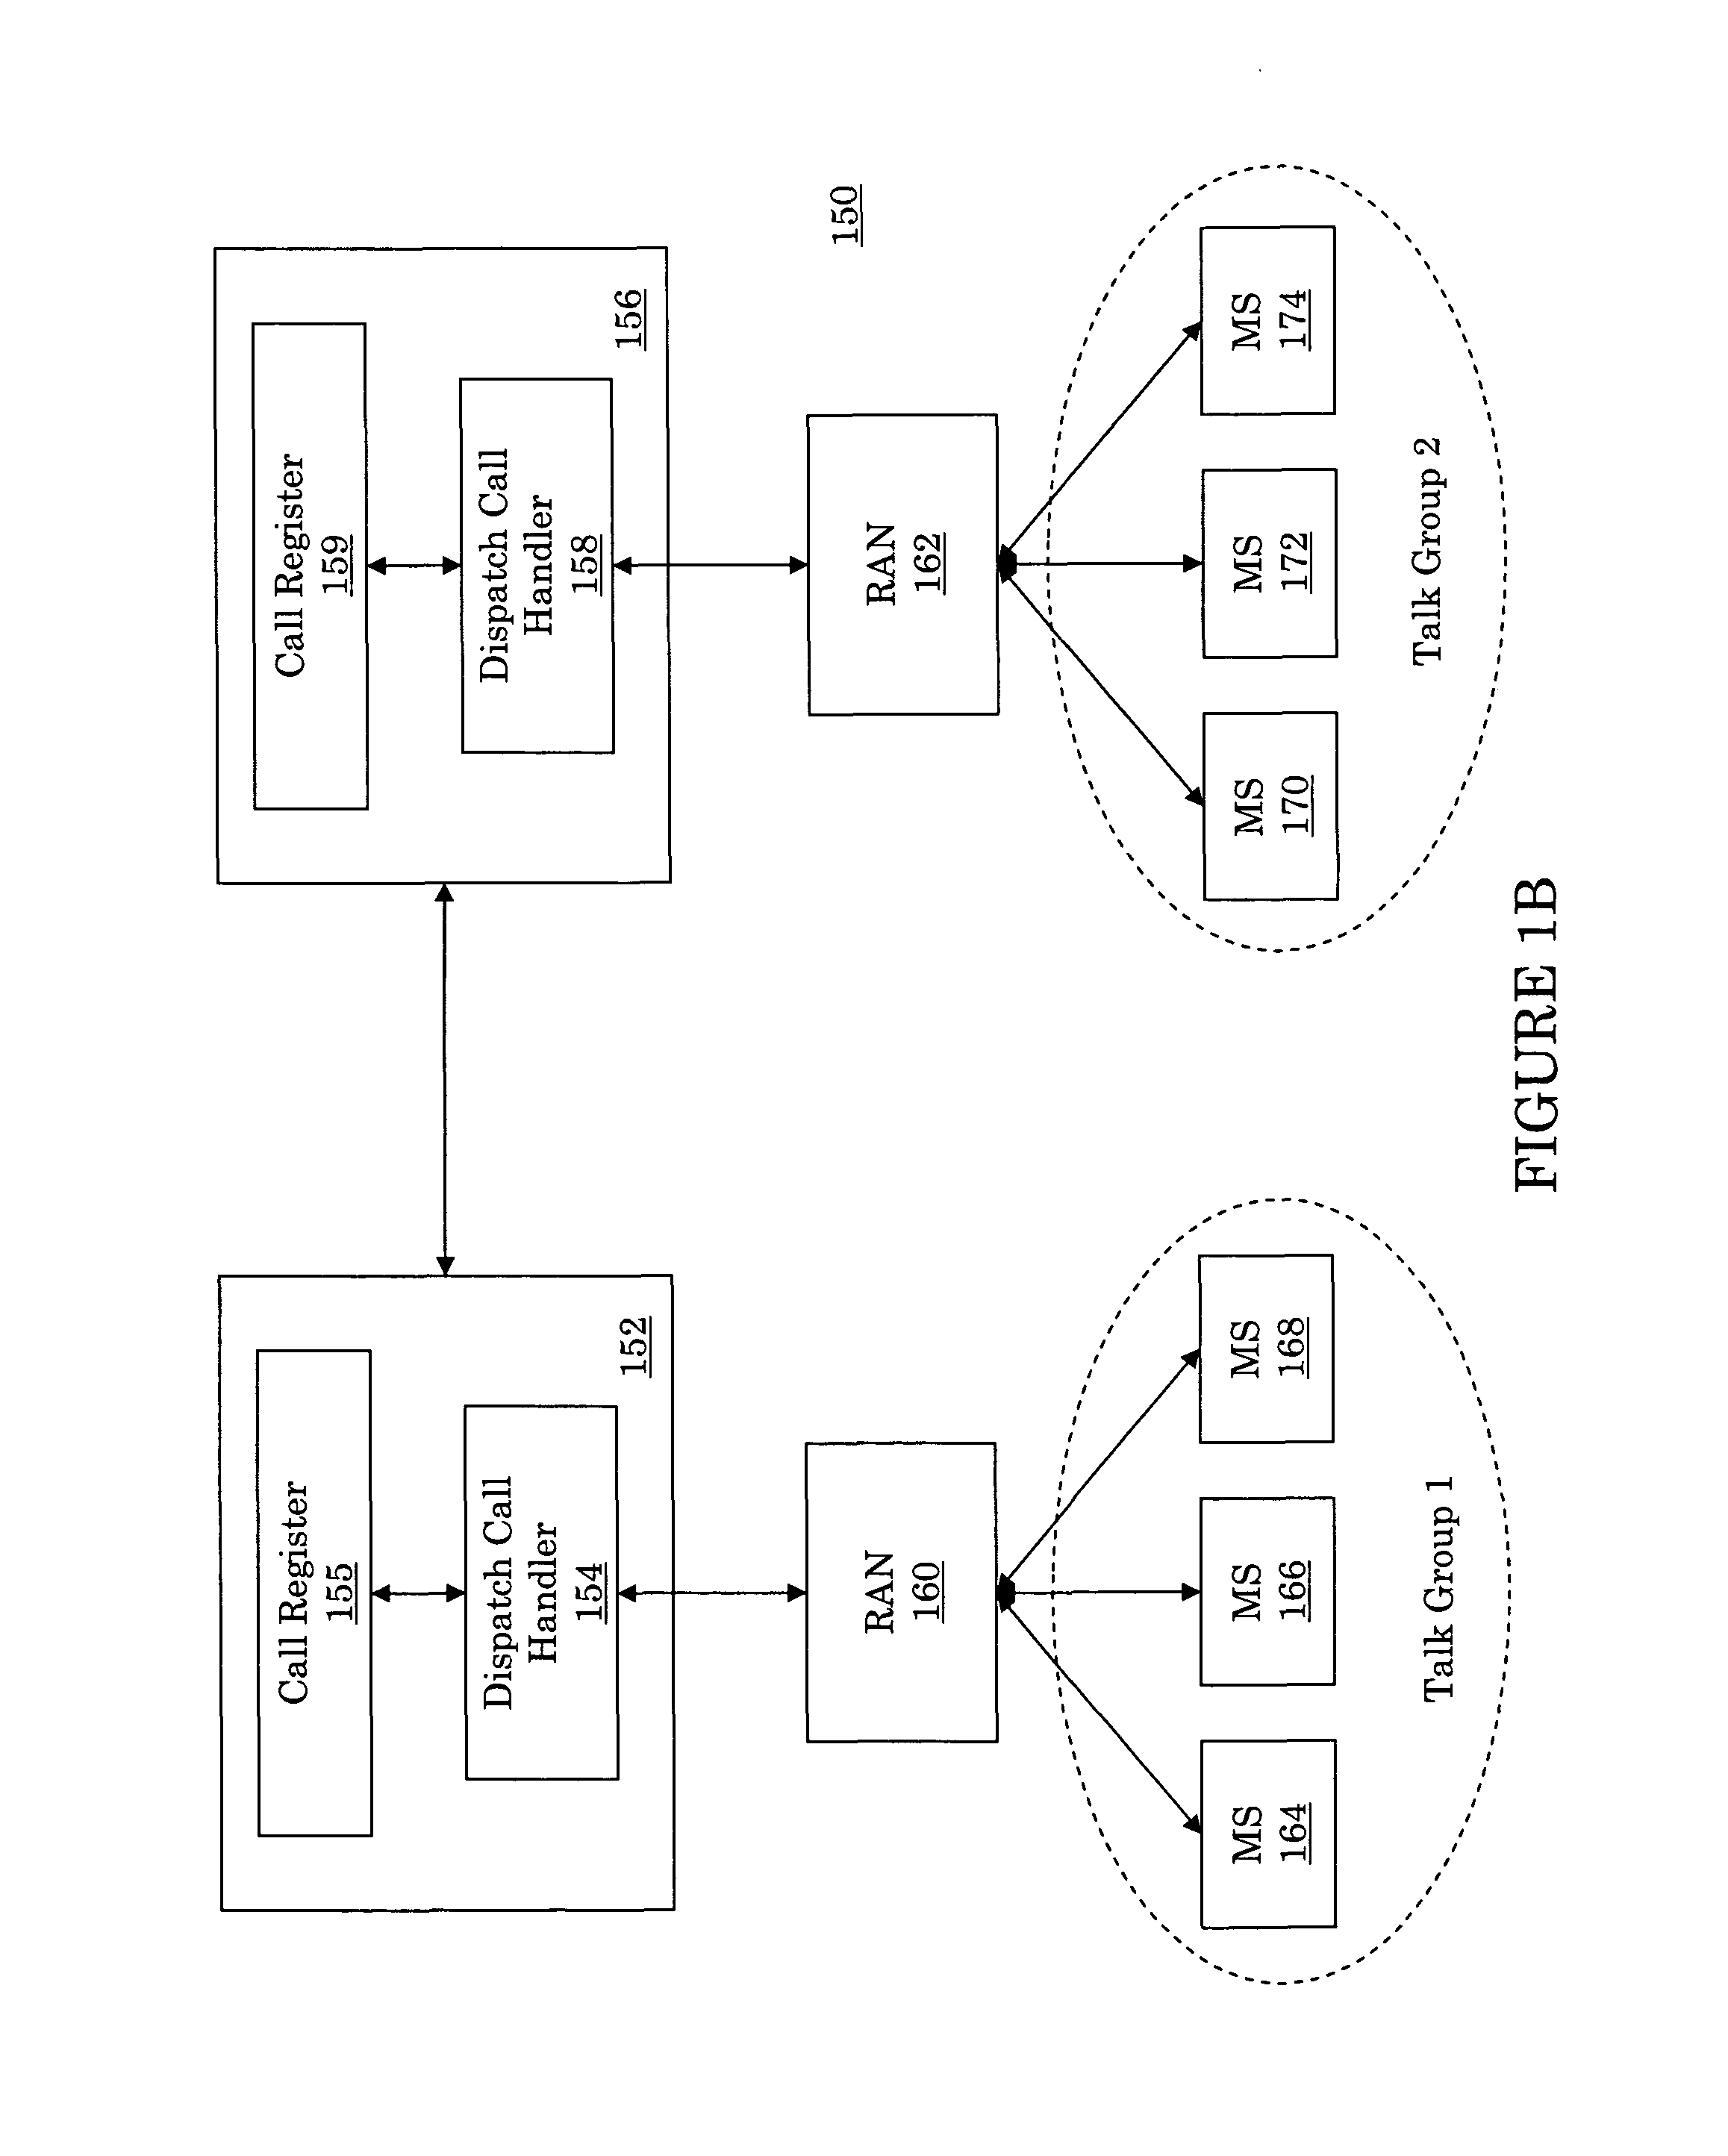 Systems and methods for merging active talk groups